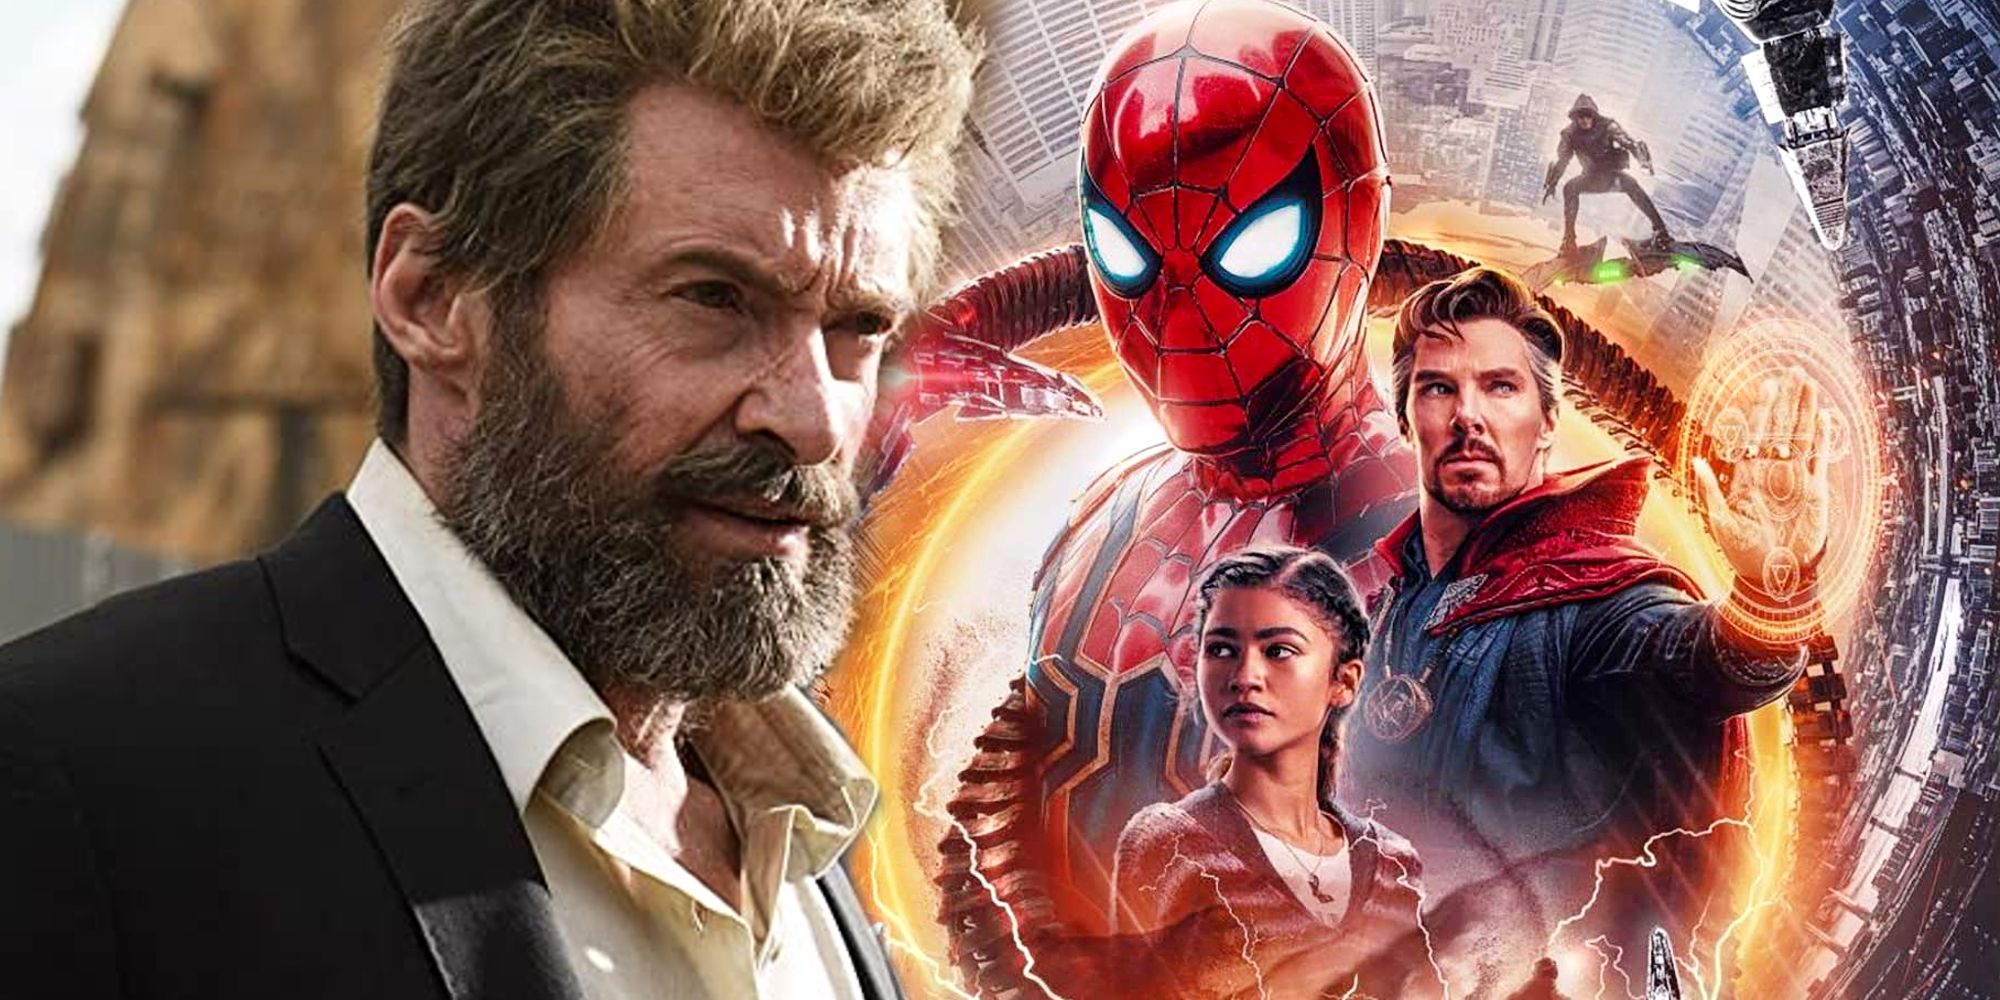 Spider-Man’s Multiverse Proves Jackman’s Wolverine Can Enter The MCU